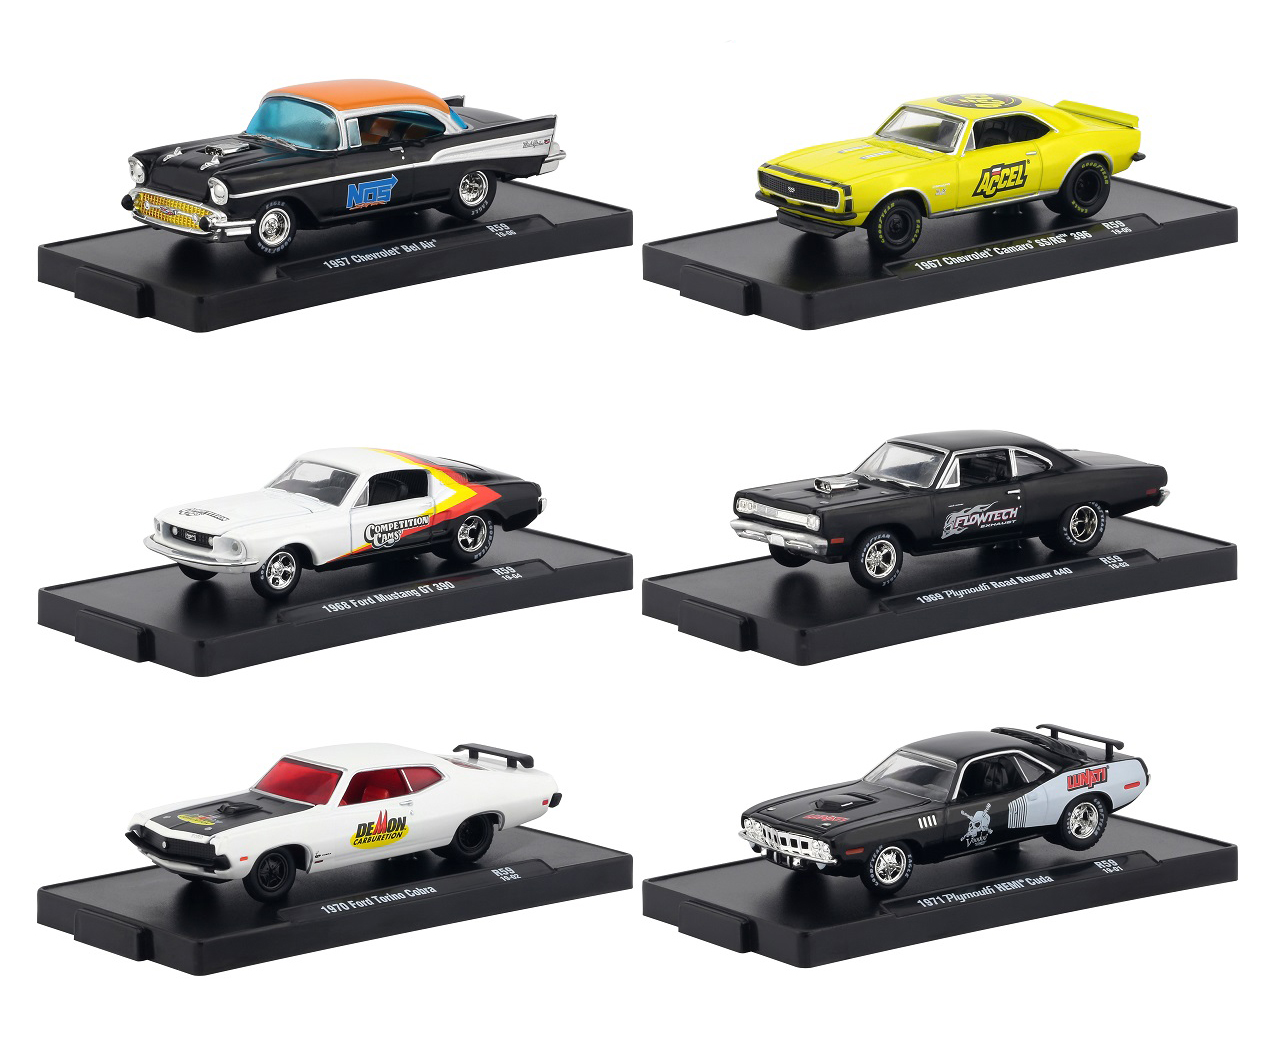 Drivers 6 Cars Set Release 59 In Blister Packs 1/64 Diecast Model Cars By M2 Machines